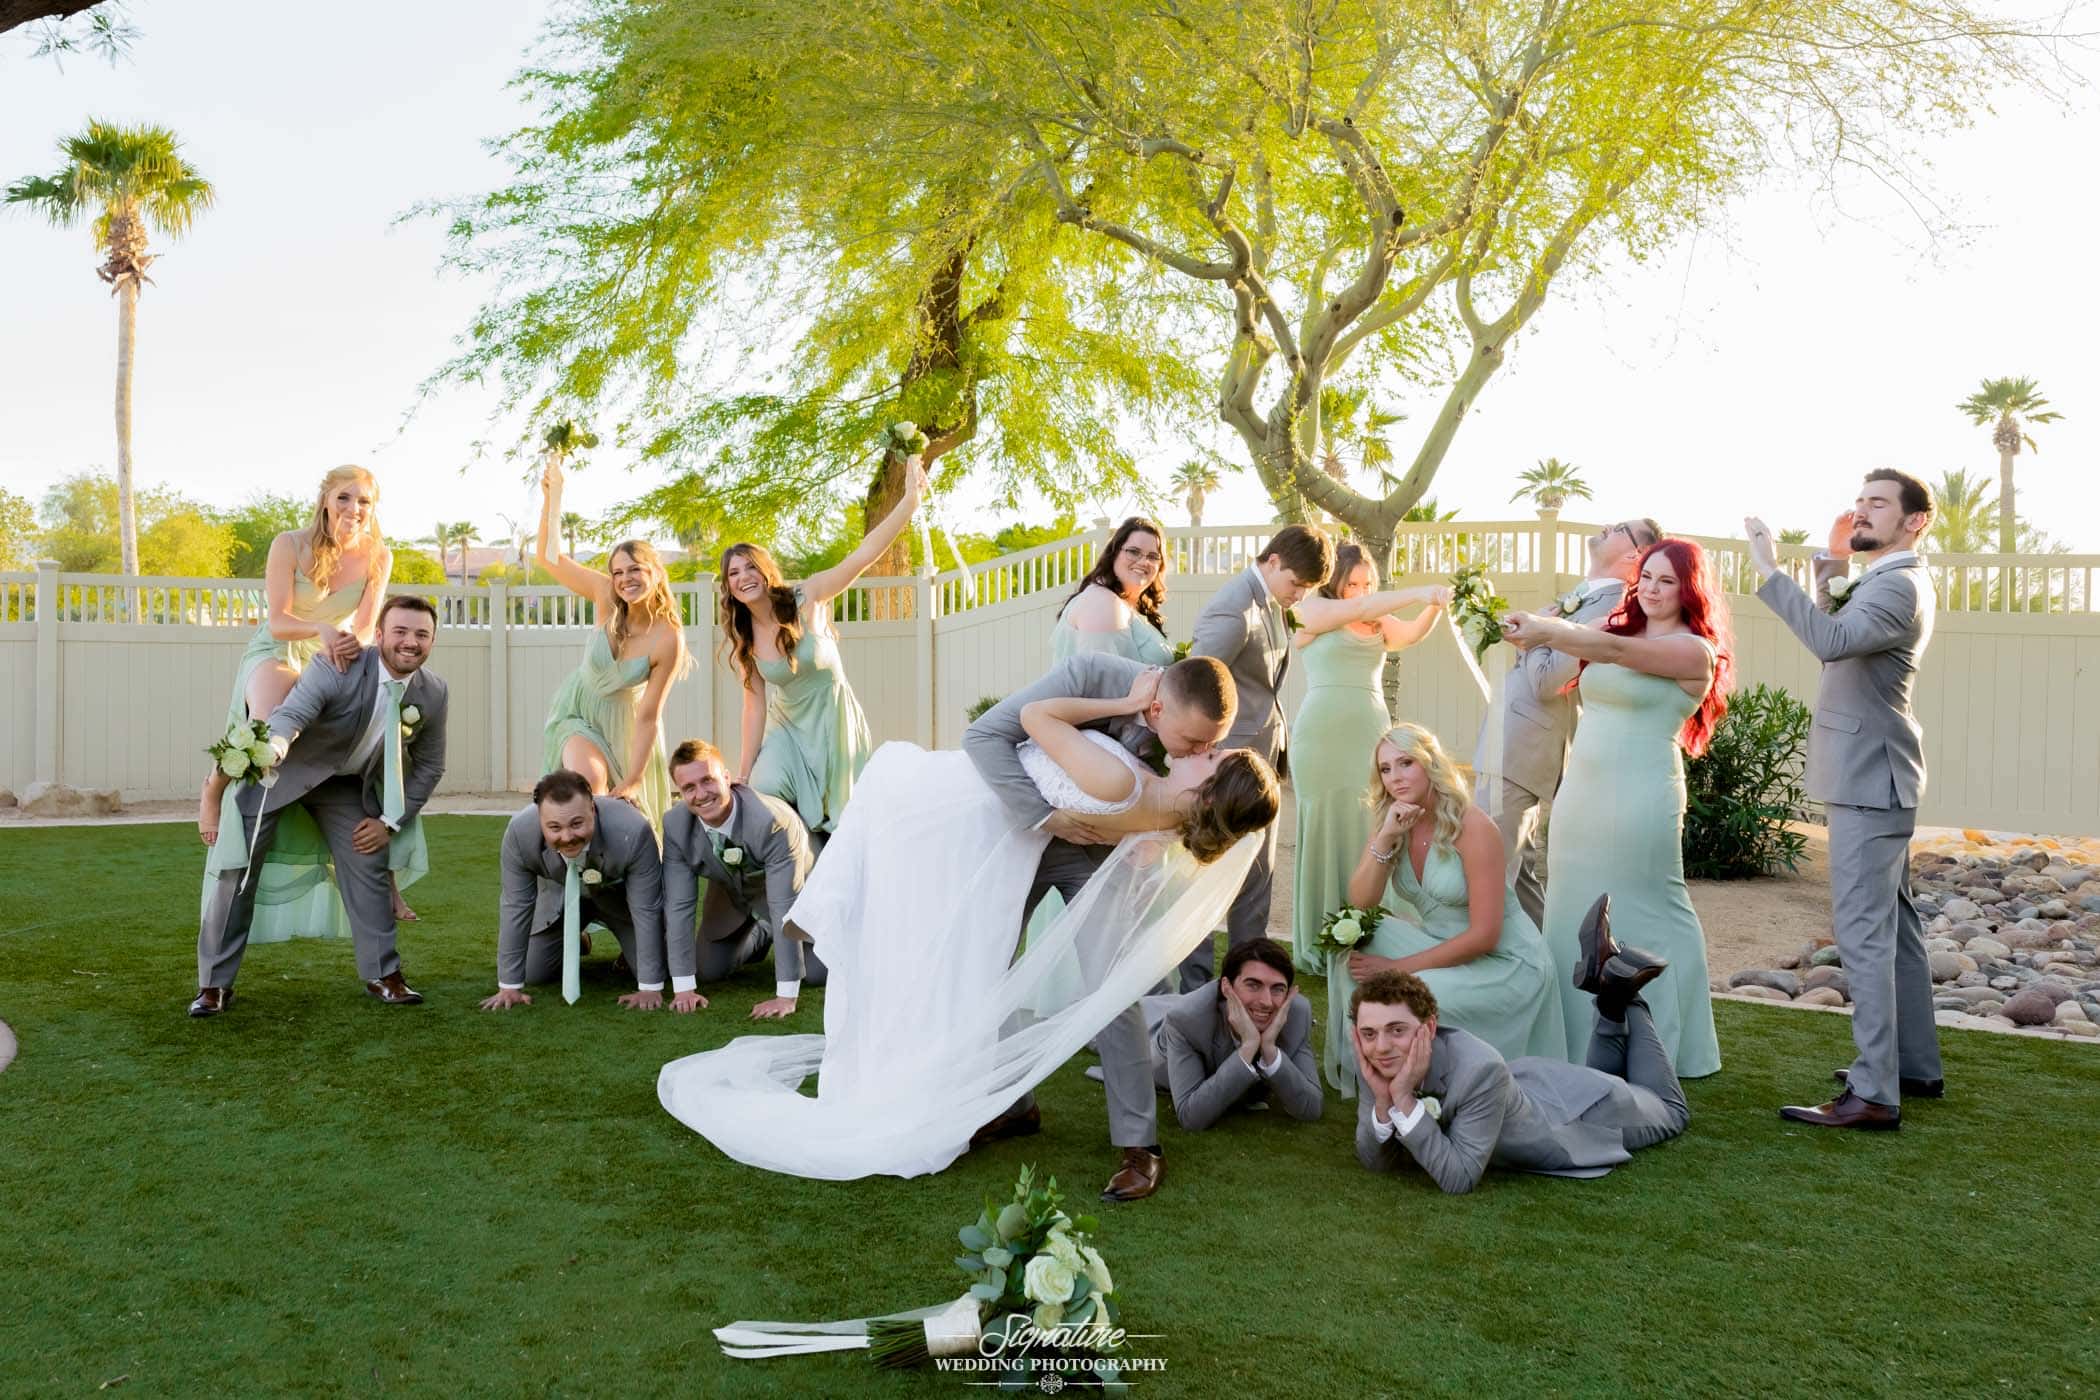 Bride and groom with wedding party funny pose